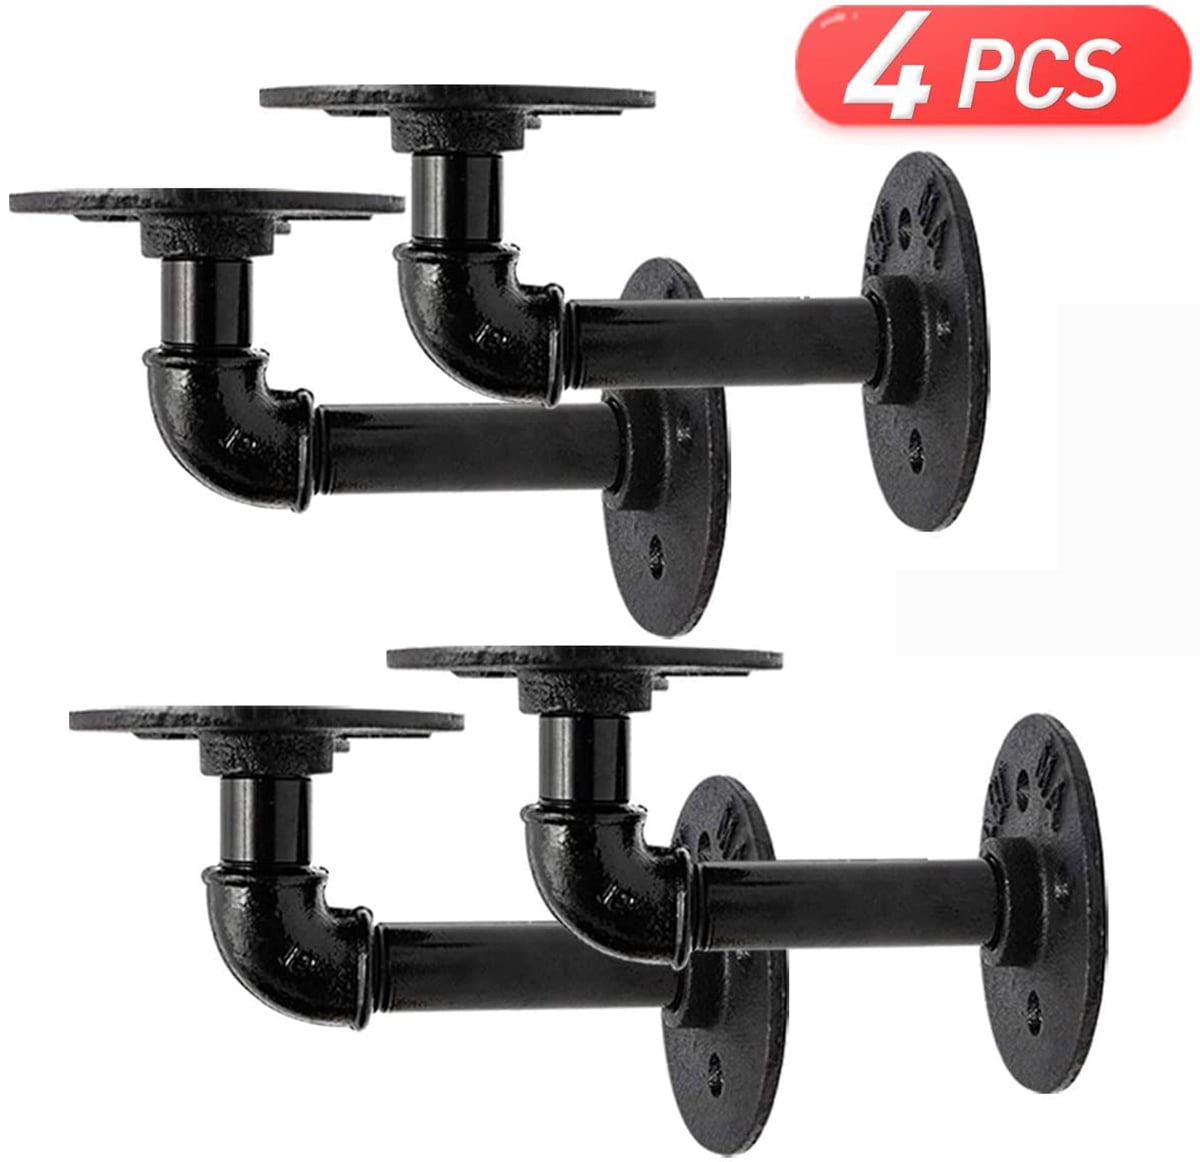 4 sets 10" Iron Fittings Rustic Pipe 1/2" Industrial DIY Shelf Brackets Flanges 